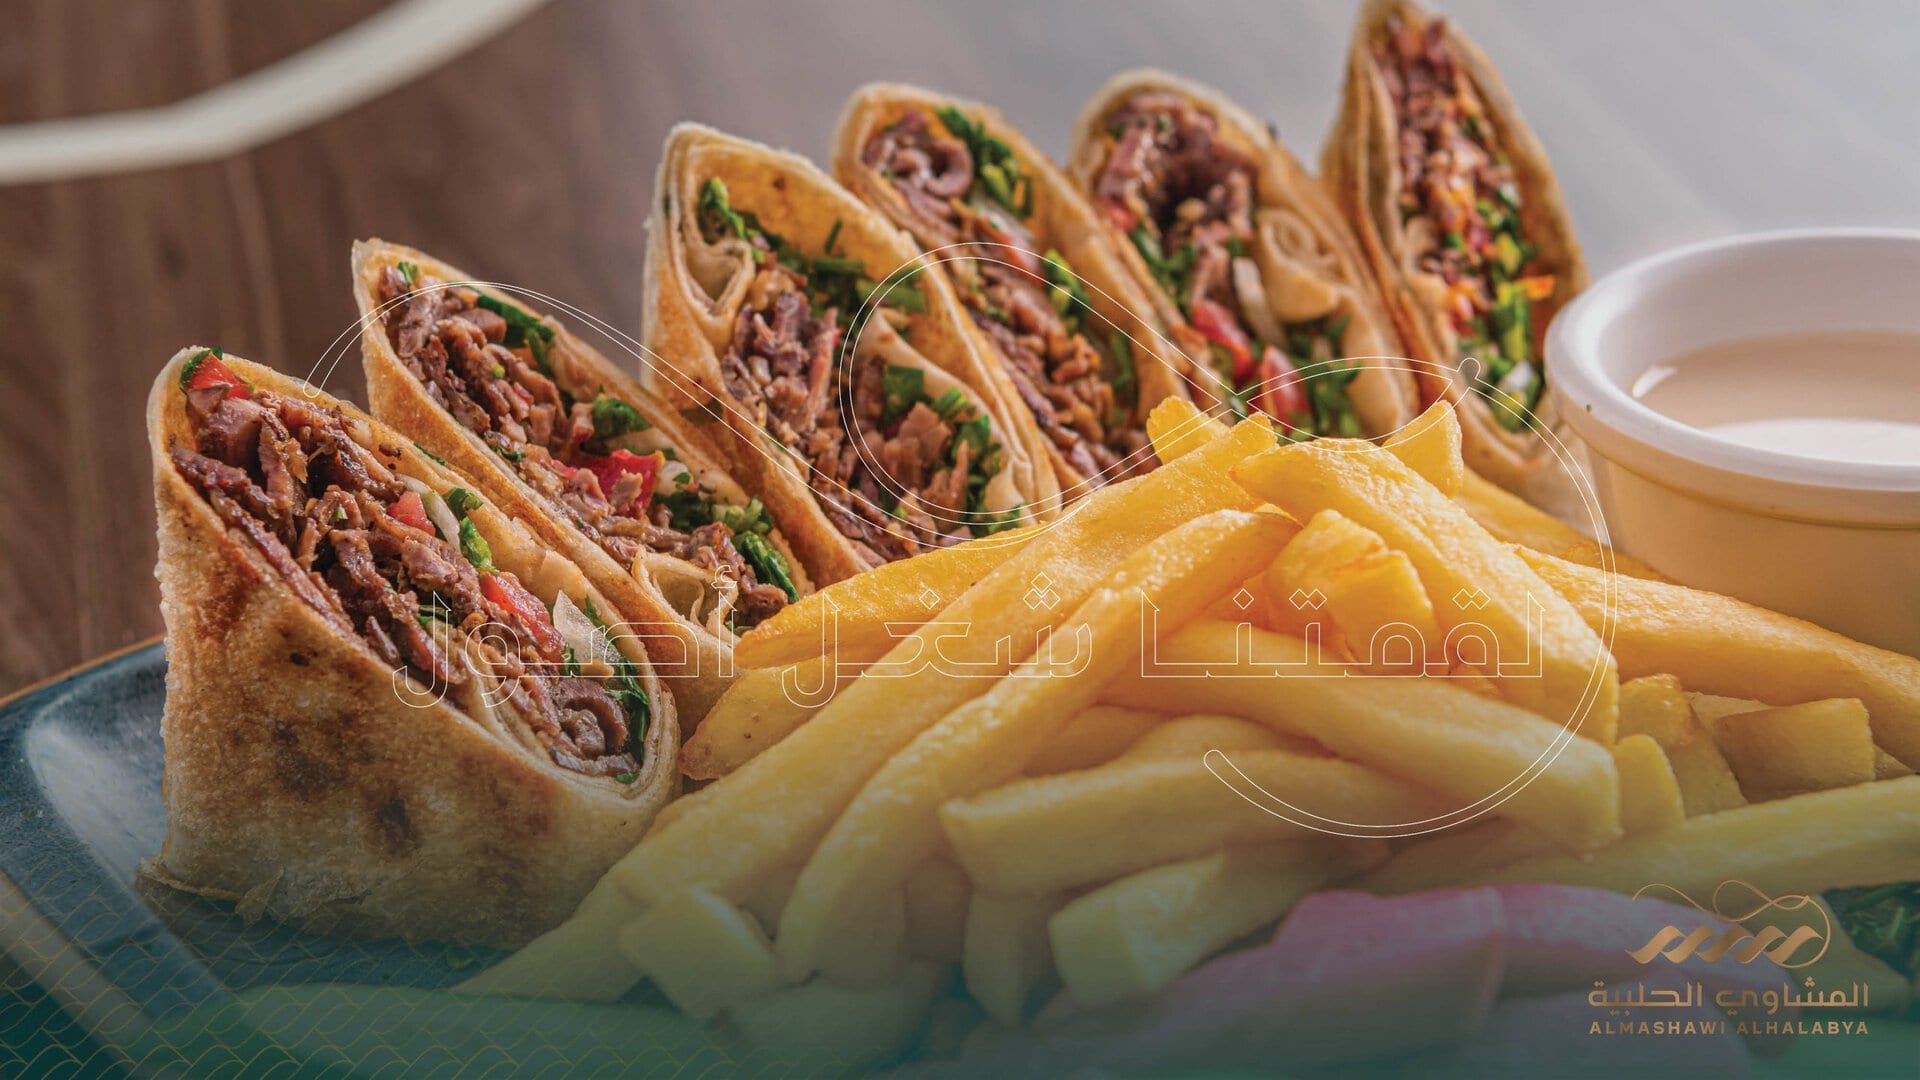 Enjoy the Flavorful Combination of Spices in Every Bite: Best Meat Shawarma in Dubai